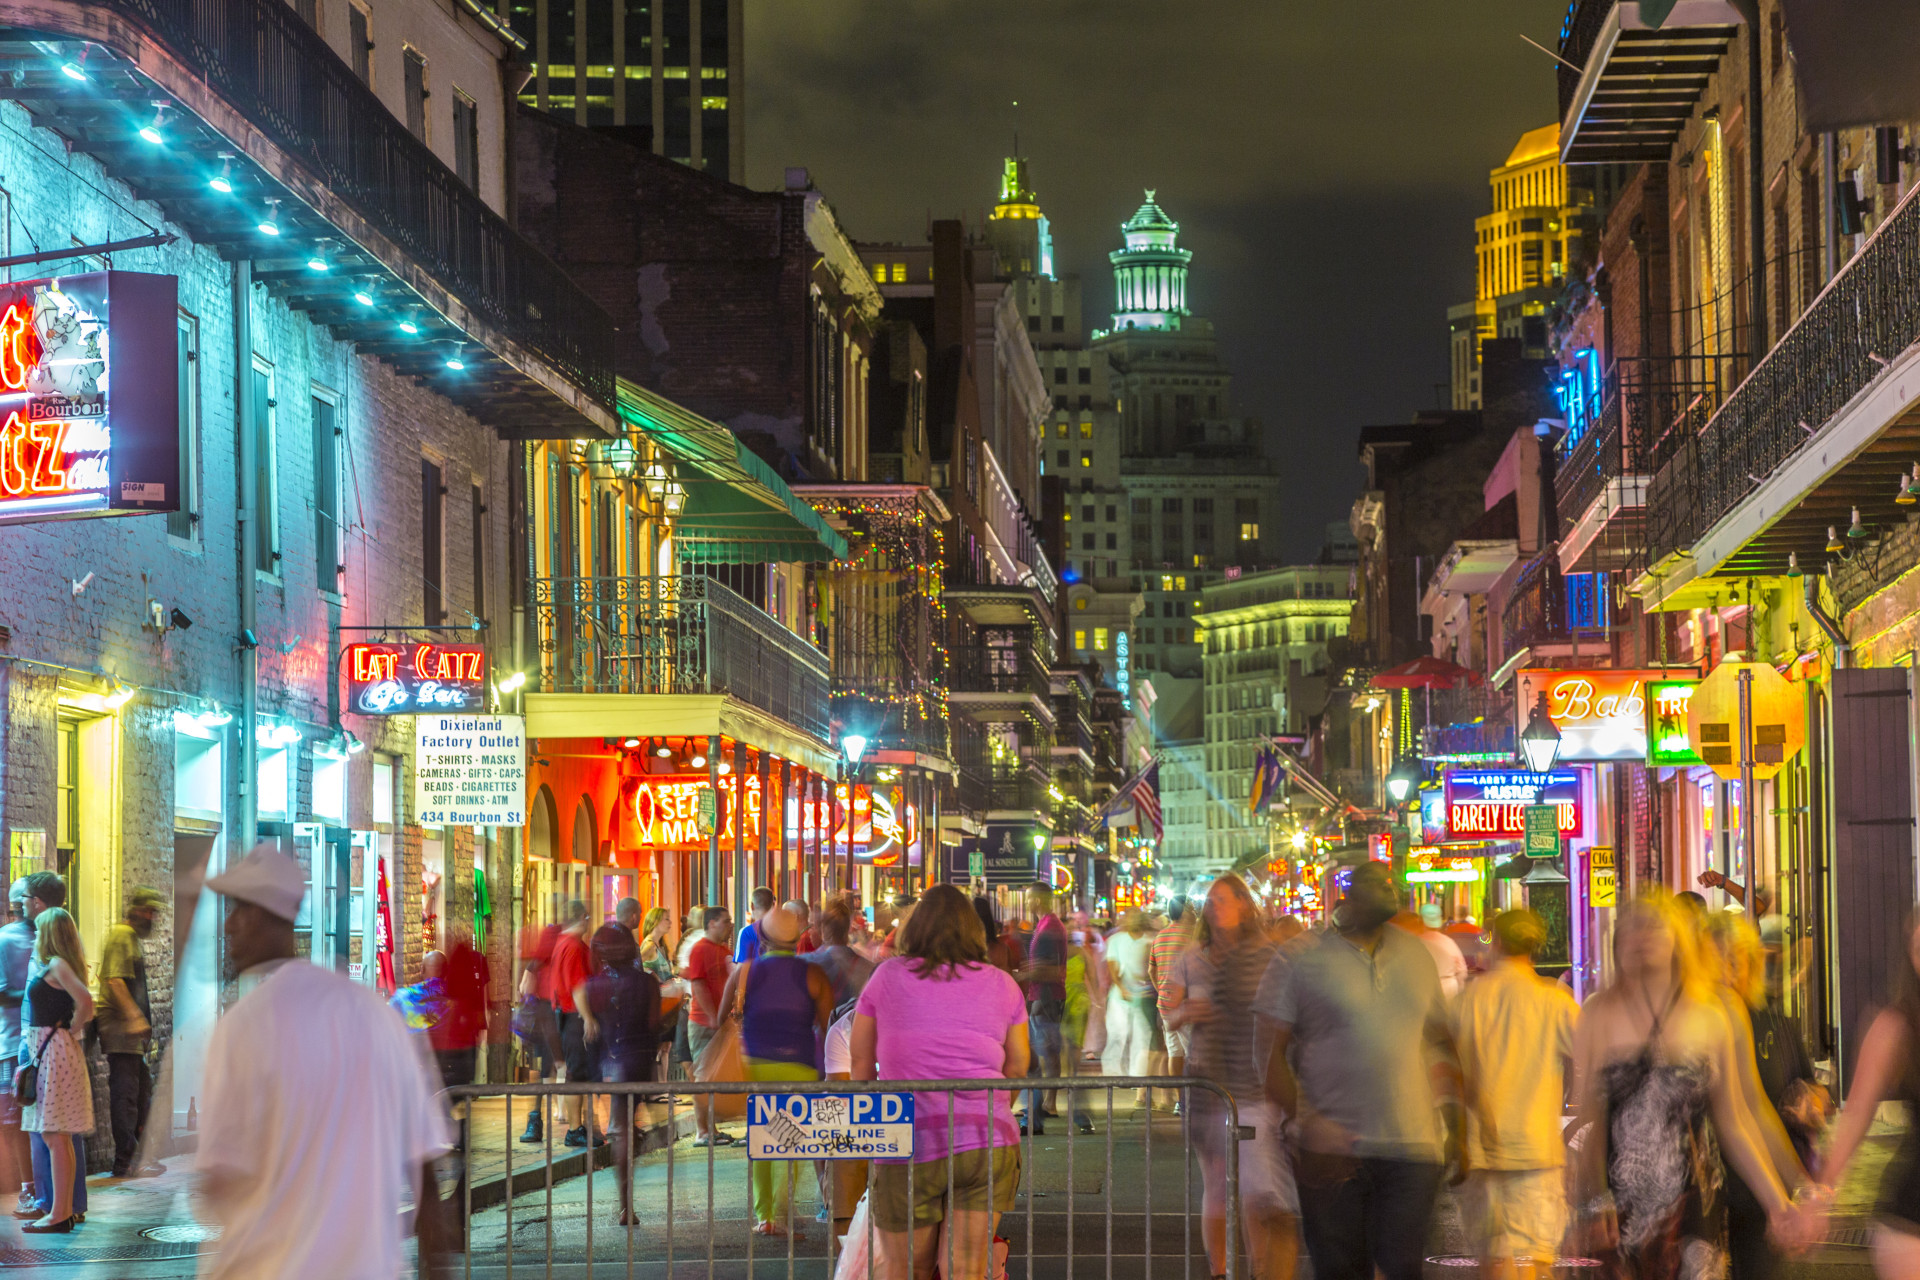 This vibrant southern city is unique for its melting pot of cultural influences.